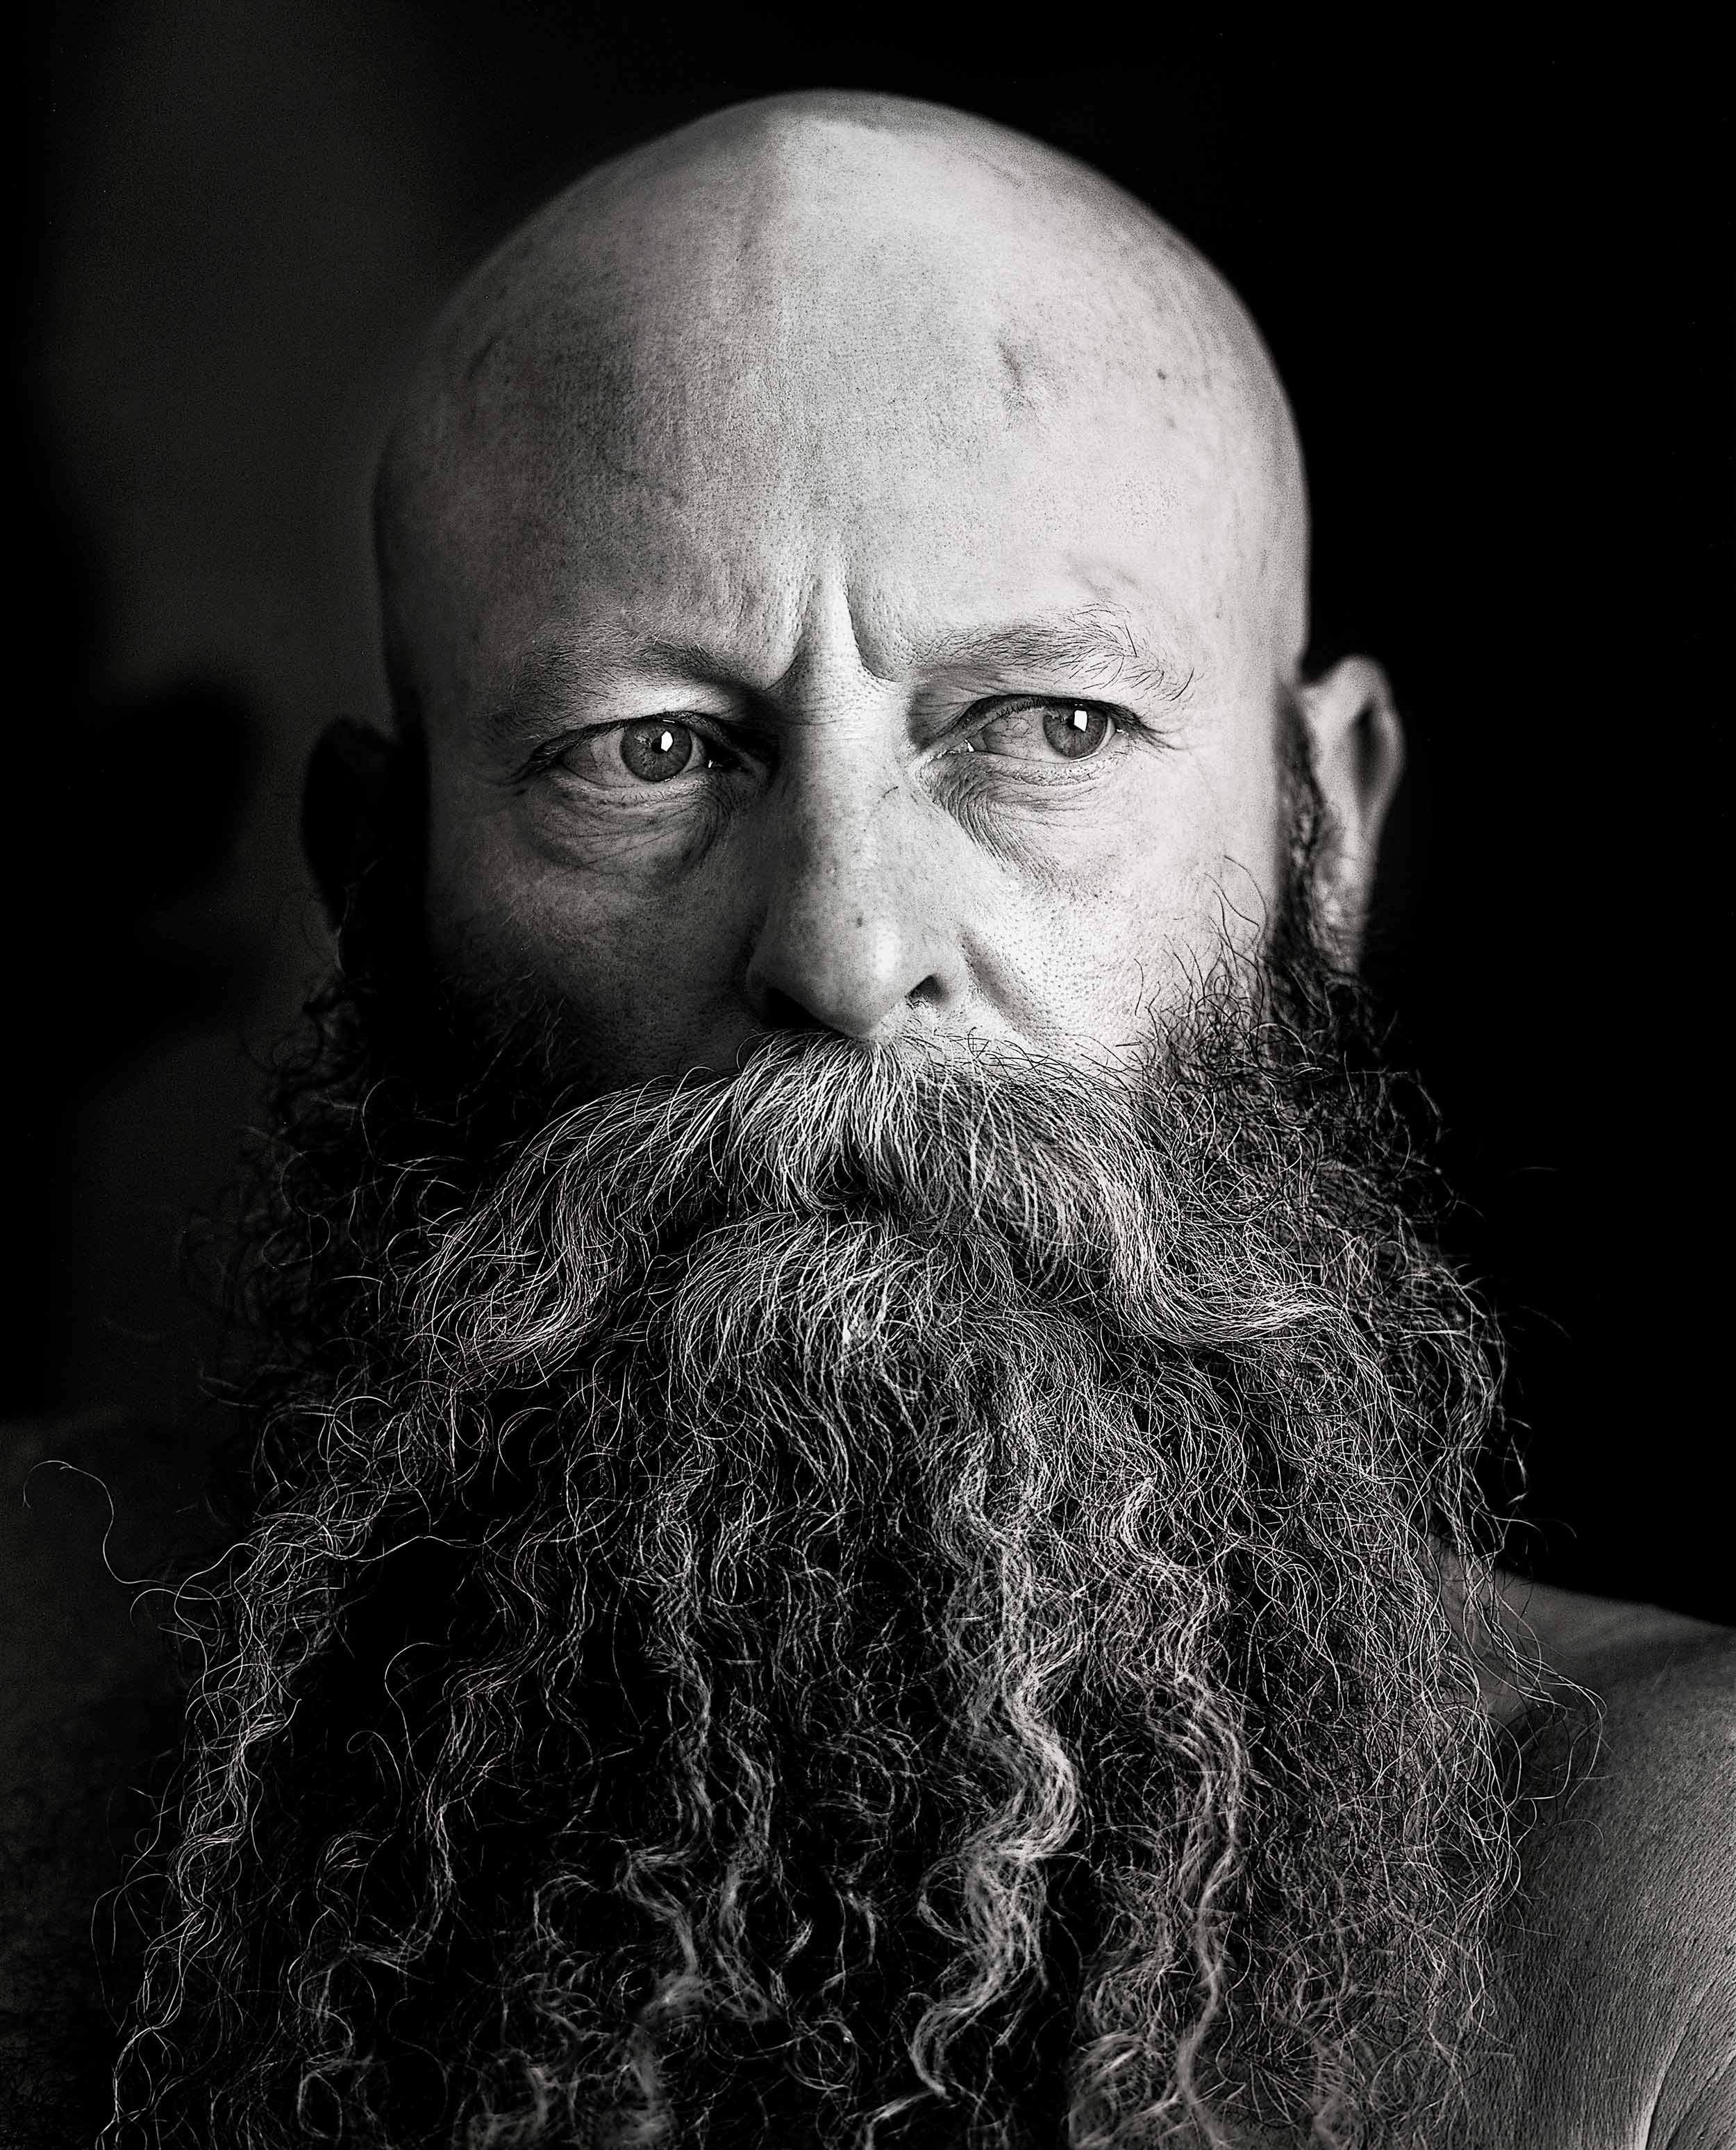 Black and white photo of a bearded bald man close up